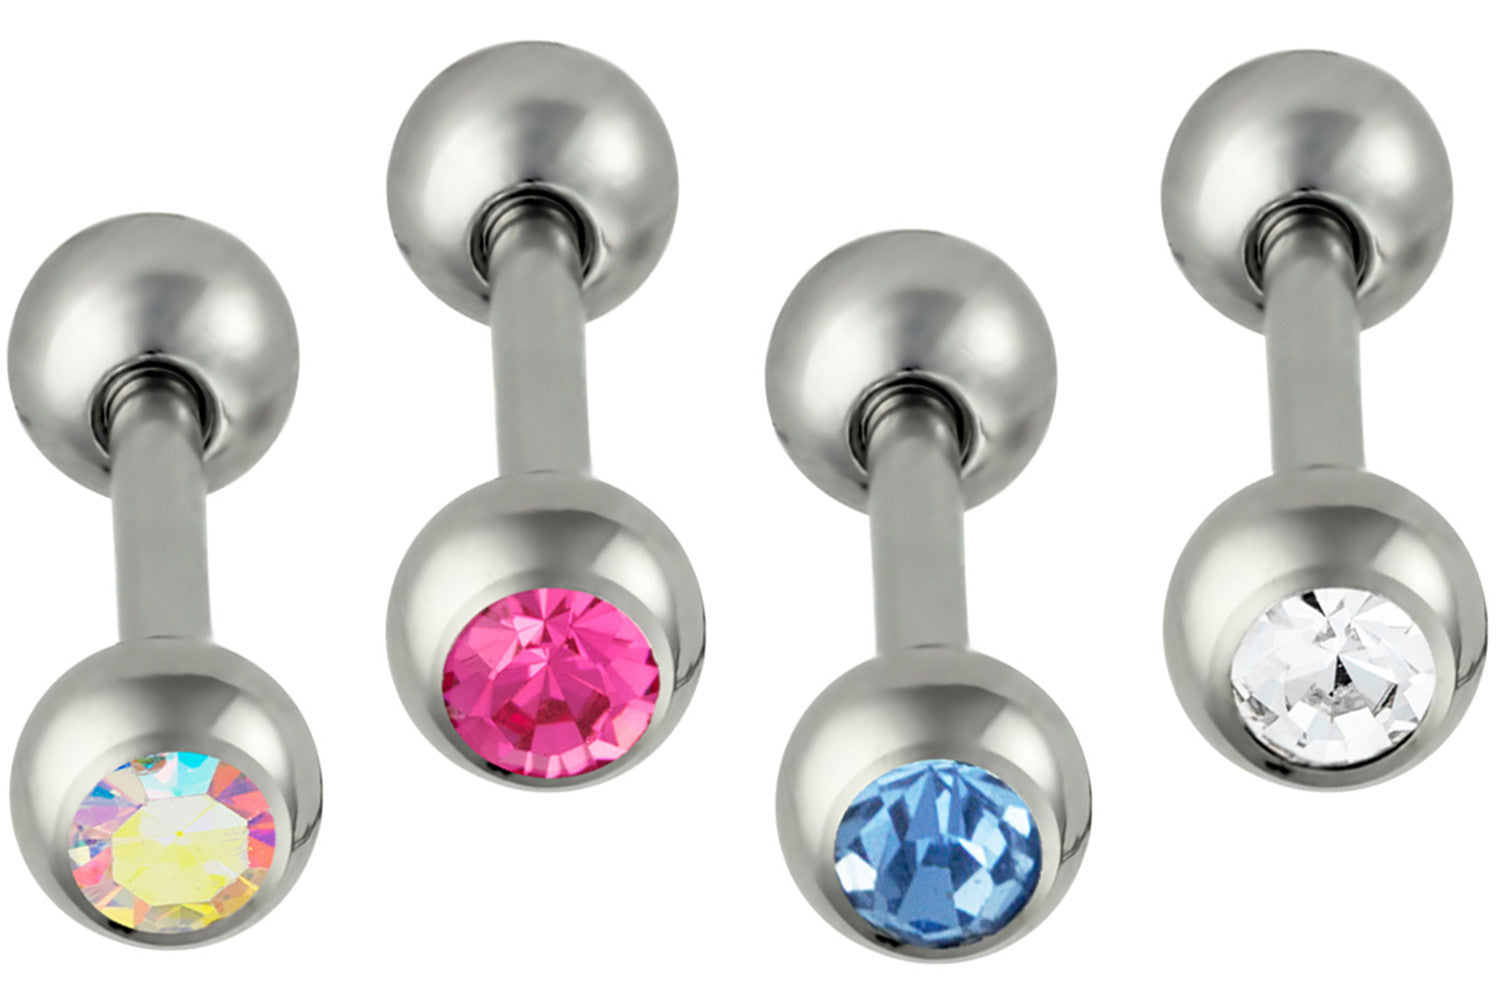 These 16 gauge cartilage stud barbells are made with surgical grade 316L Stainless Steel and pressed fit (not glued) Cubic Zirconia crystals. The barbells measure 1/4" (6 mm) long and they come with 4 mm end balls. Both balls unscrew for easy use. This body jewelry is hypoallergenic and nickel free.